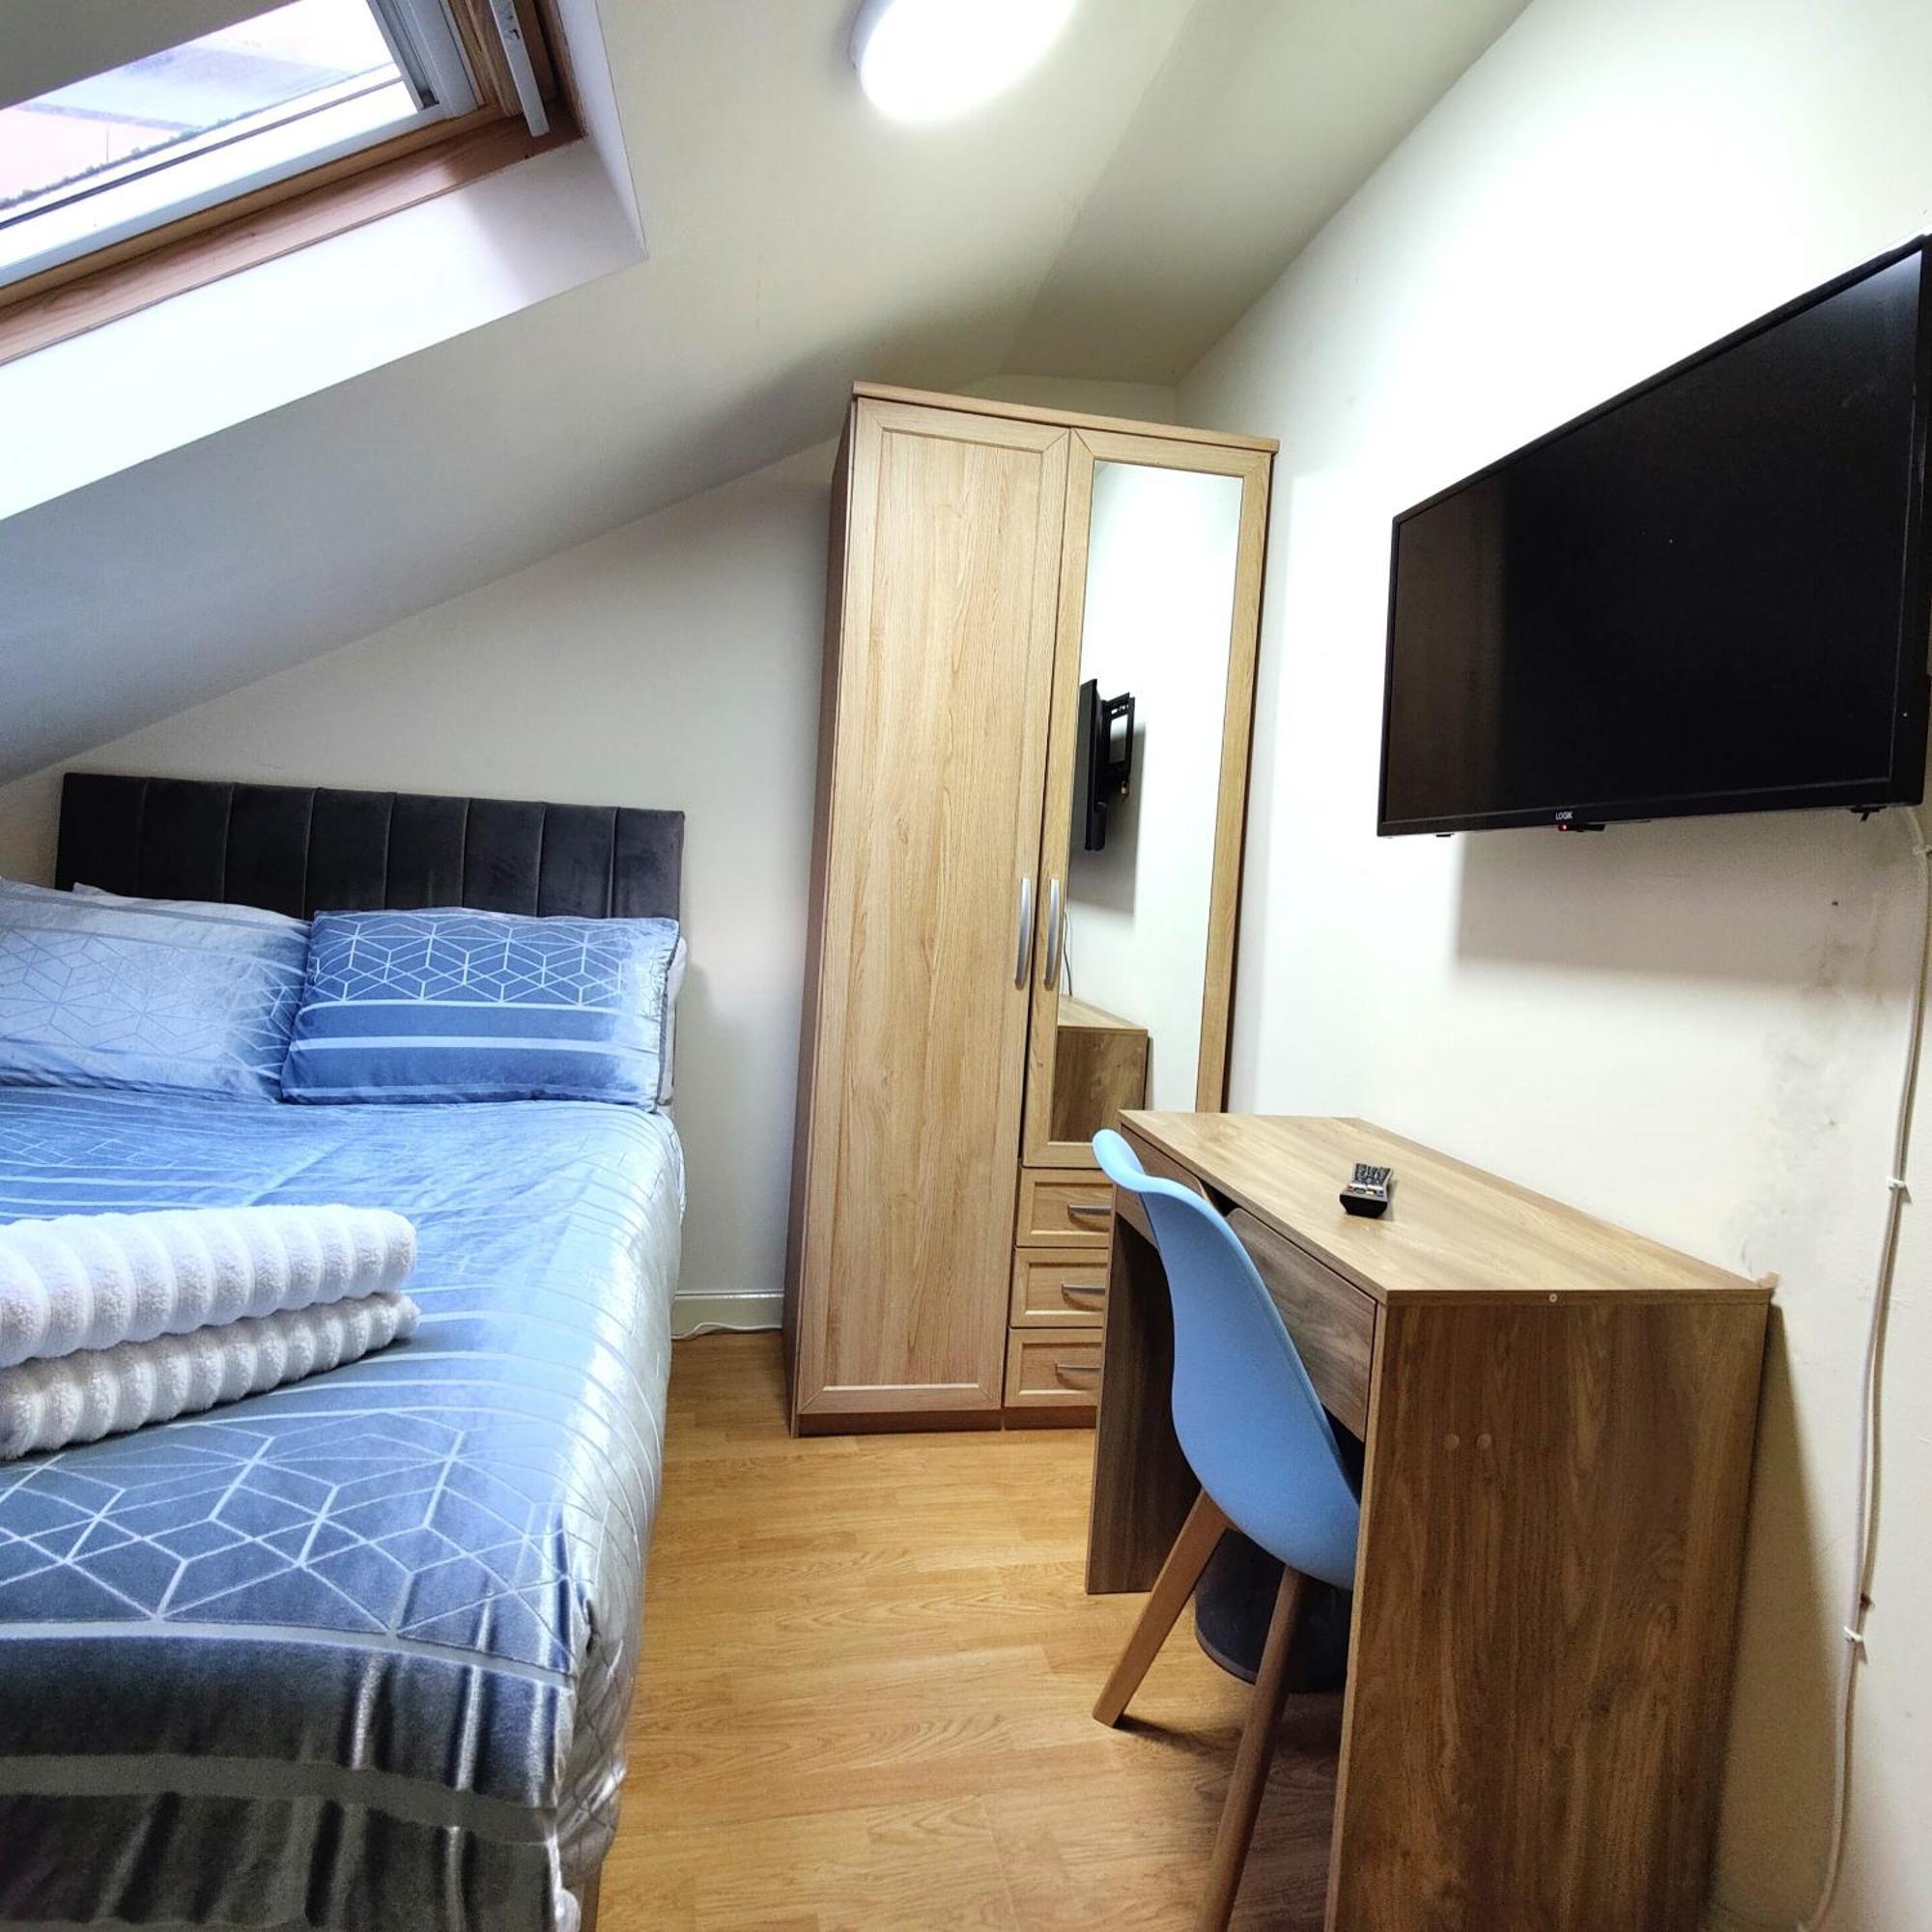 Liverpool City Centre Private Rooms Including Smart Tvs - With Shared Bathroom ภายนอก รูปภาพ